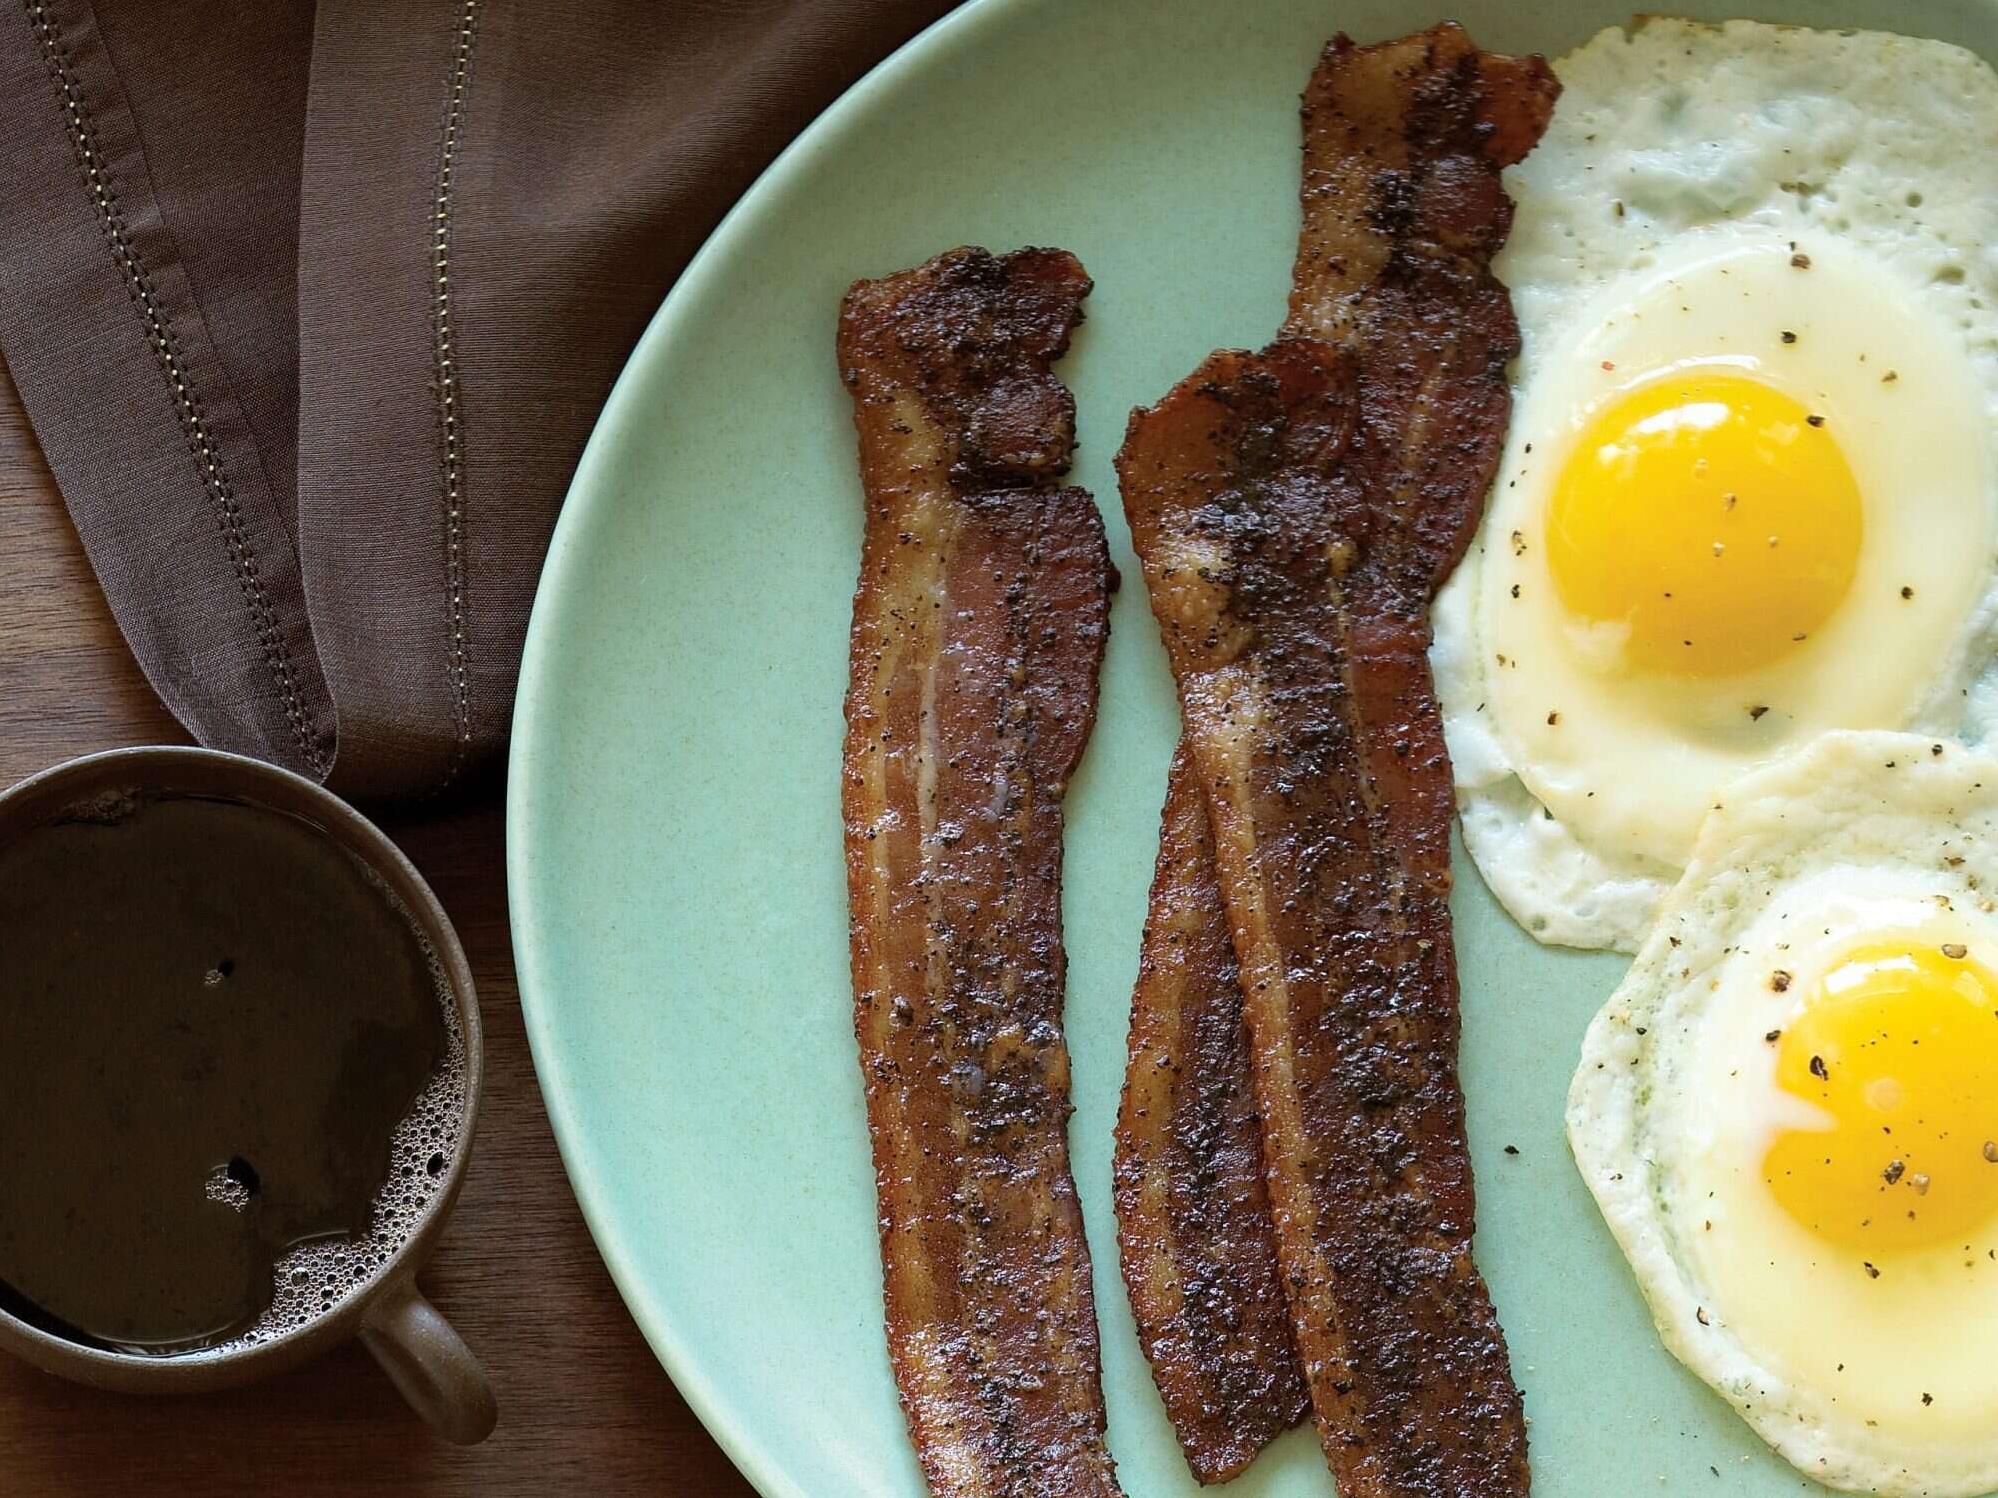 Wake up Bacon With Coffee and Brown Sugar